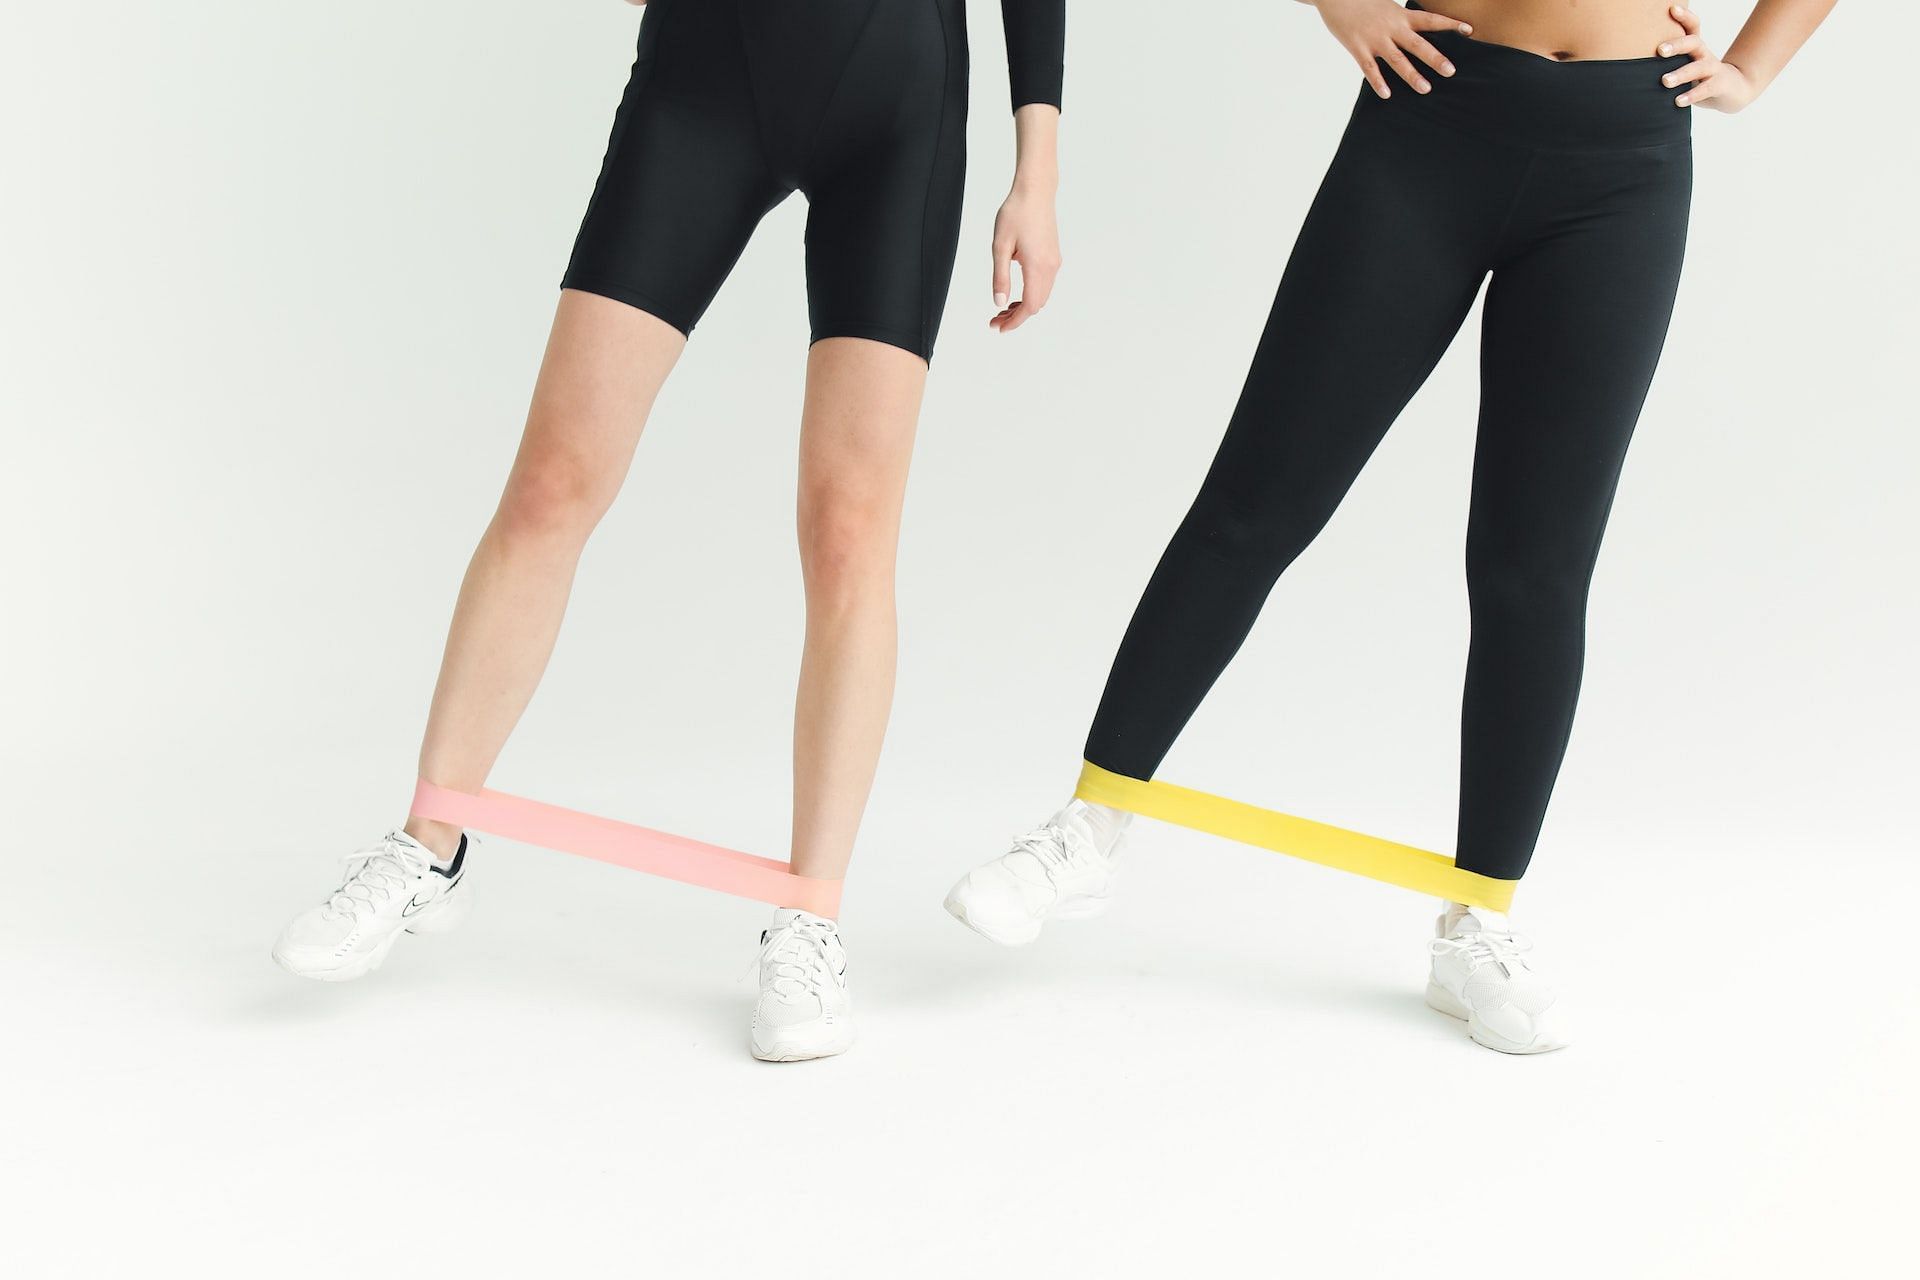 Resistance bands increase the intensity of an exercise. (Photo via Pexels/Polina Tankilevitch)